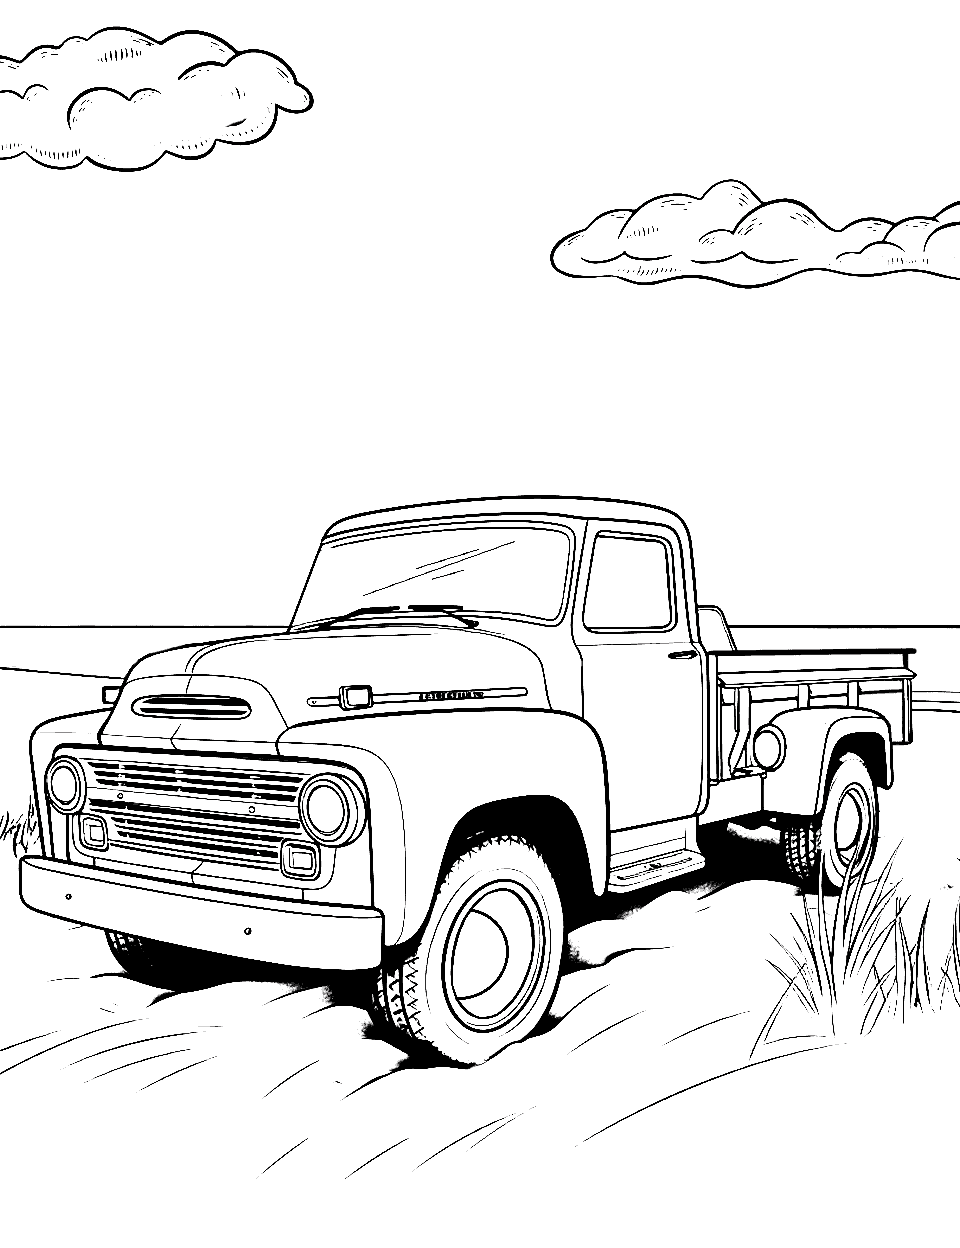 How to draw a pickup truck step by step - [10 Easy Phase] | Simple car  drawing, Car drawing easy, Easy drawings